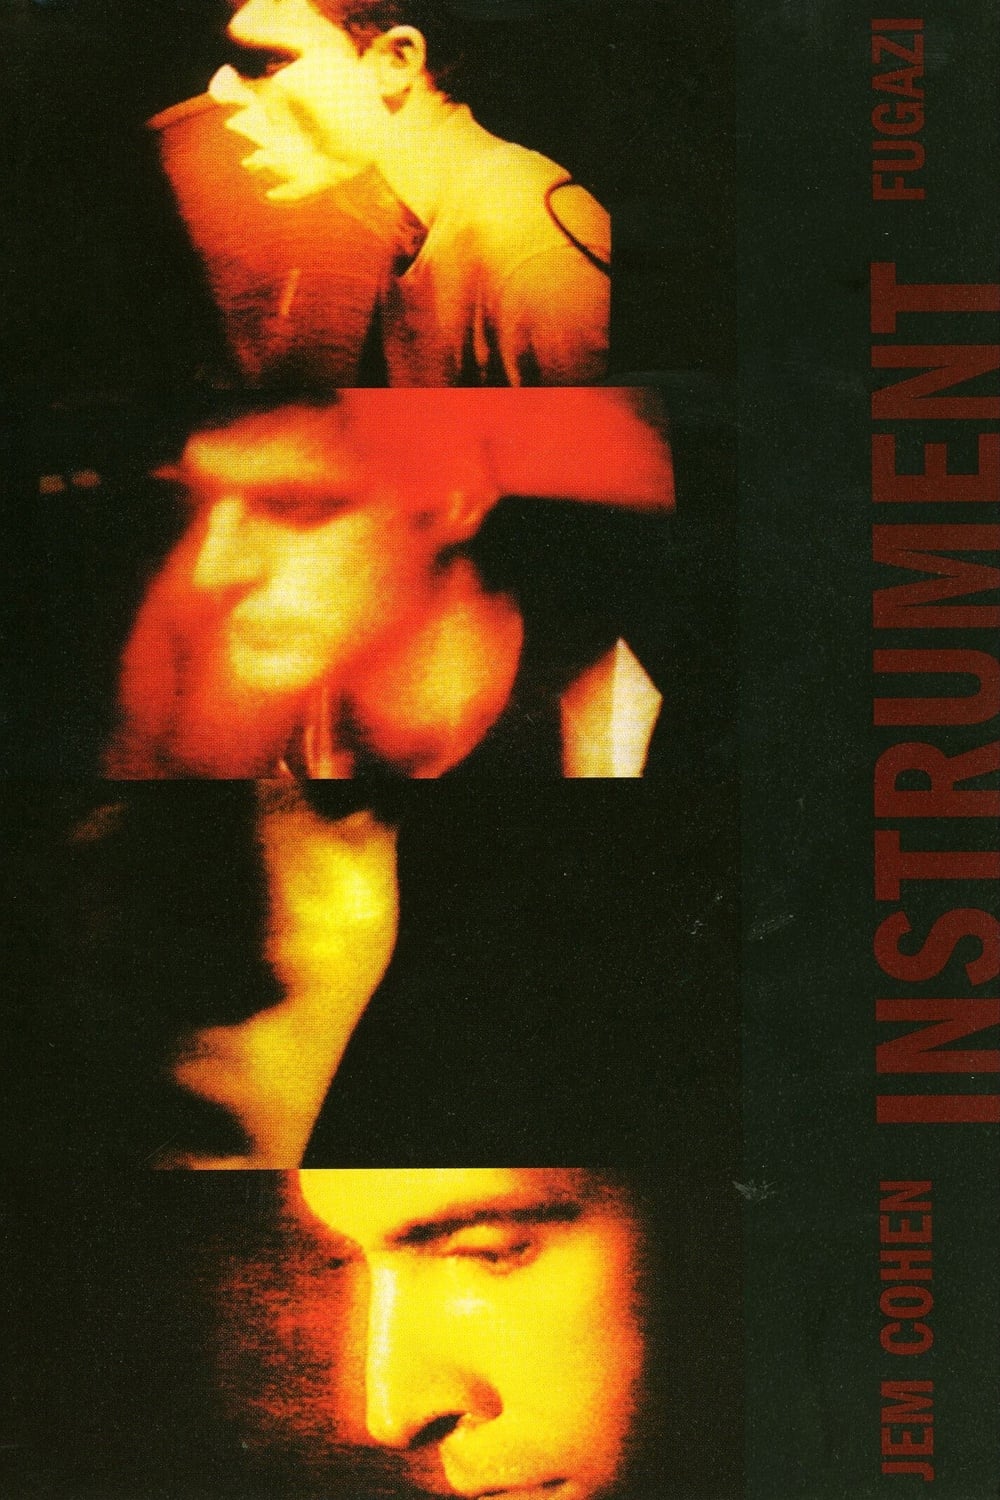 Instrument: Ten Years with the Band Fugazi streaming sur libertyvf